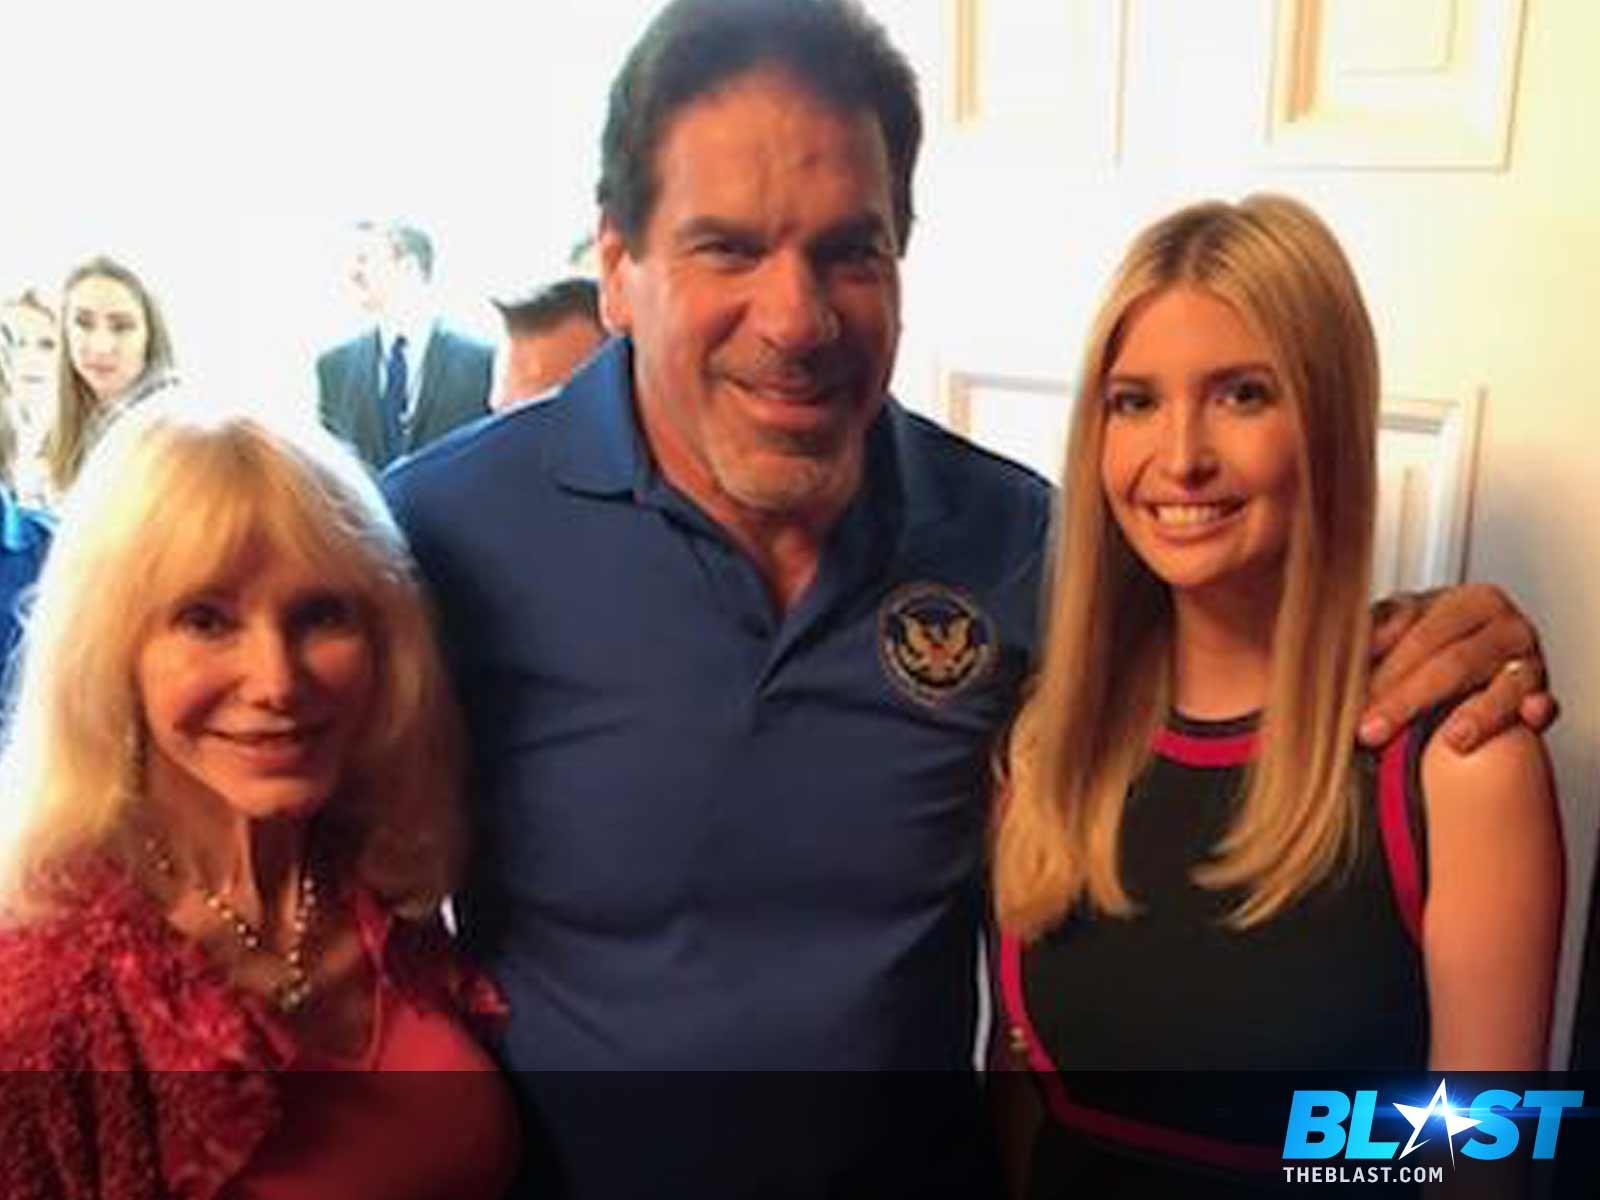 Lou Ferrigno Poses With Ivanka Trump as ‘Hulk’ Gets Sworn in On Sports Council